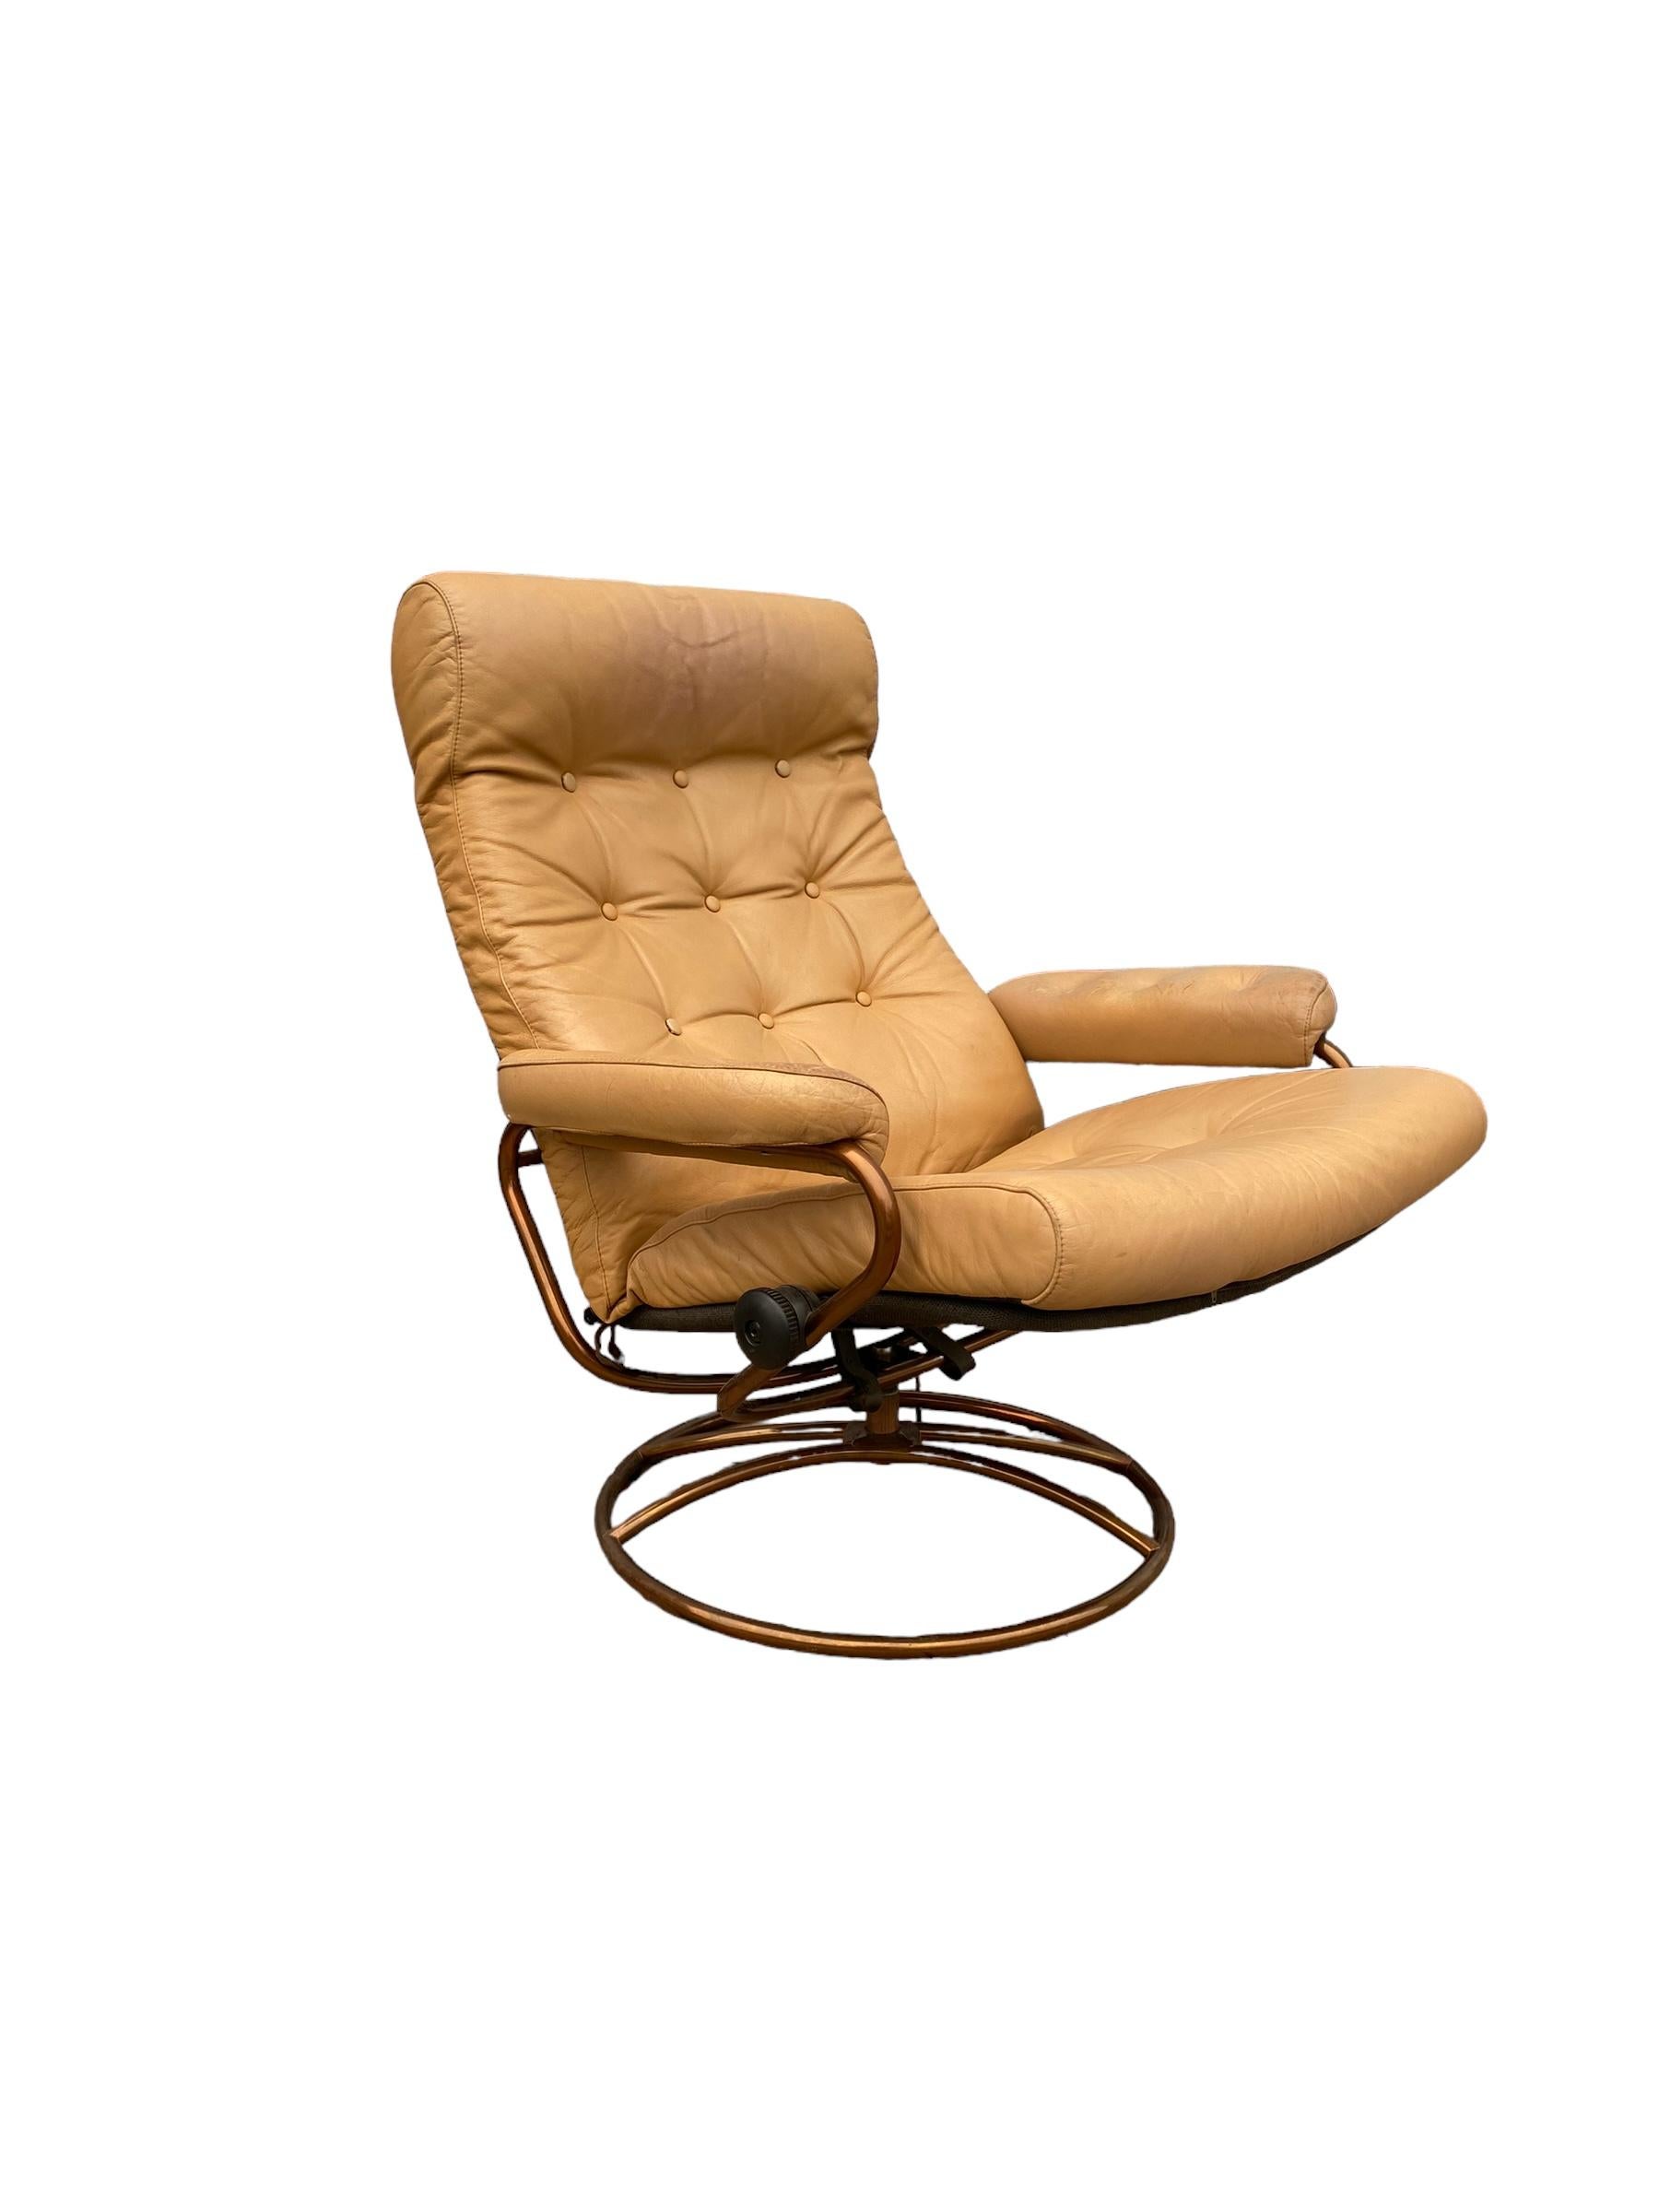 Scandinavian Modern Ekornes Stressless Reclining Lounge Chair and Ottoman in Cream with Copper Frame For Sale